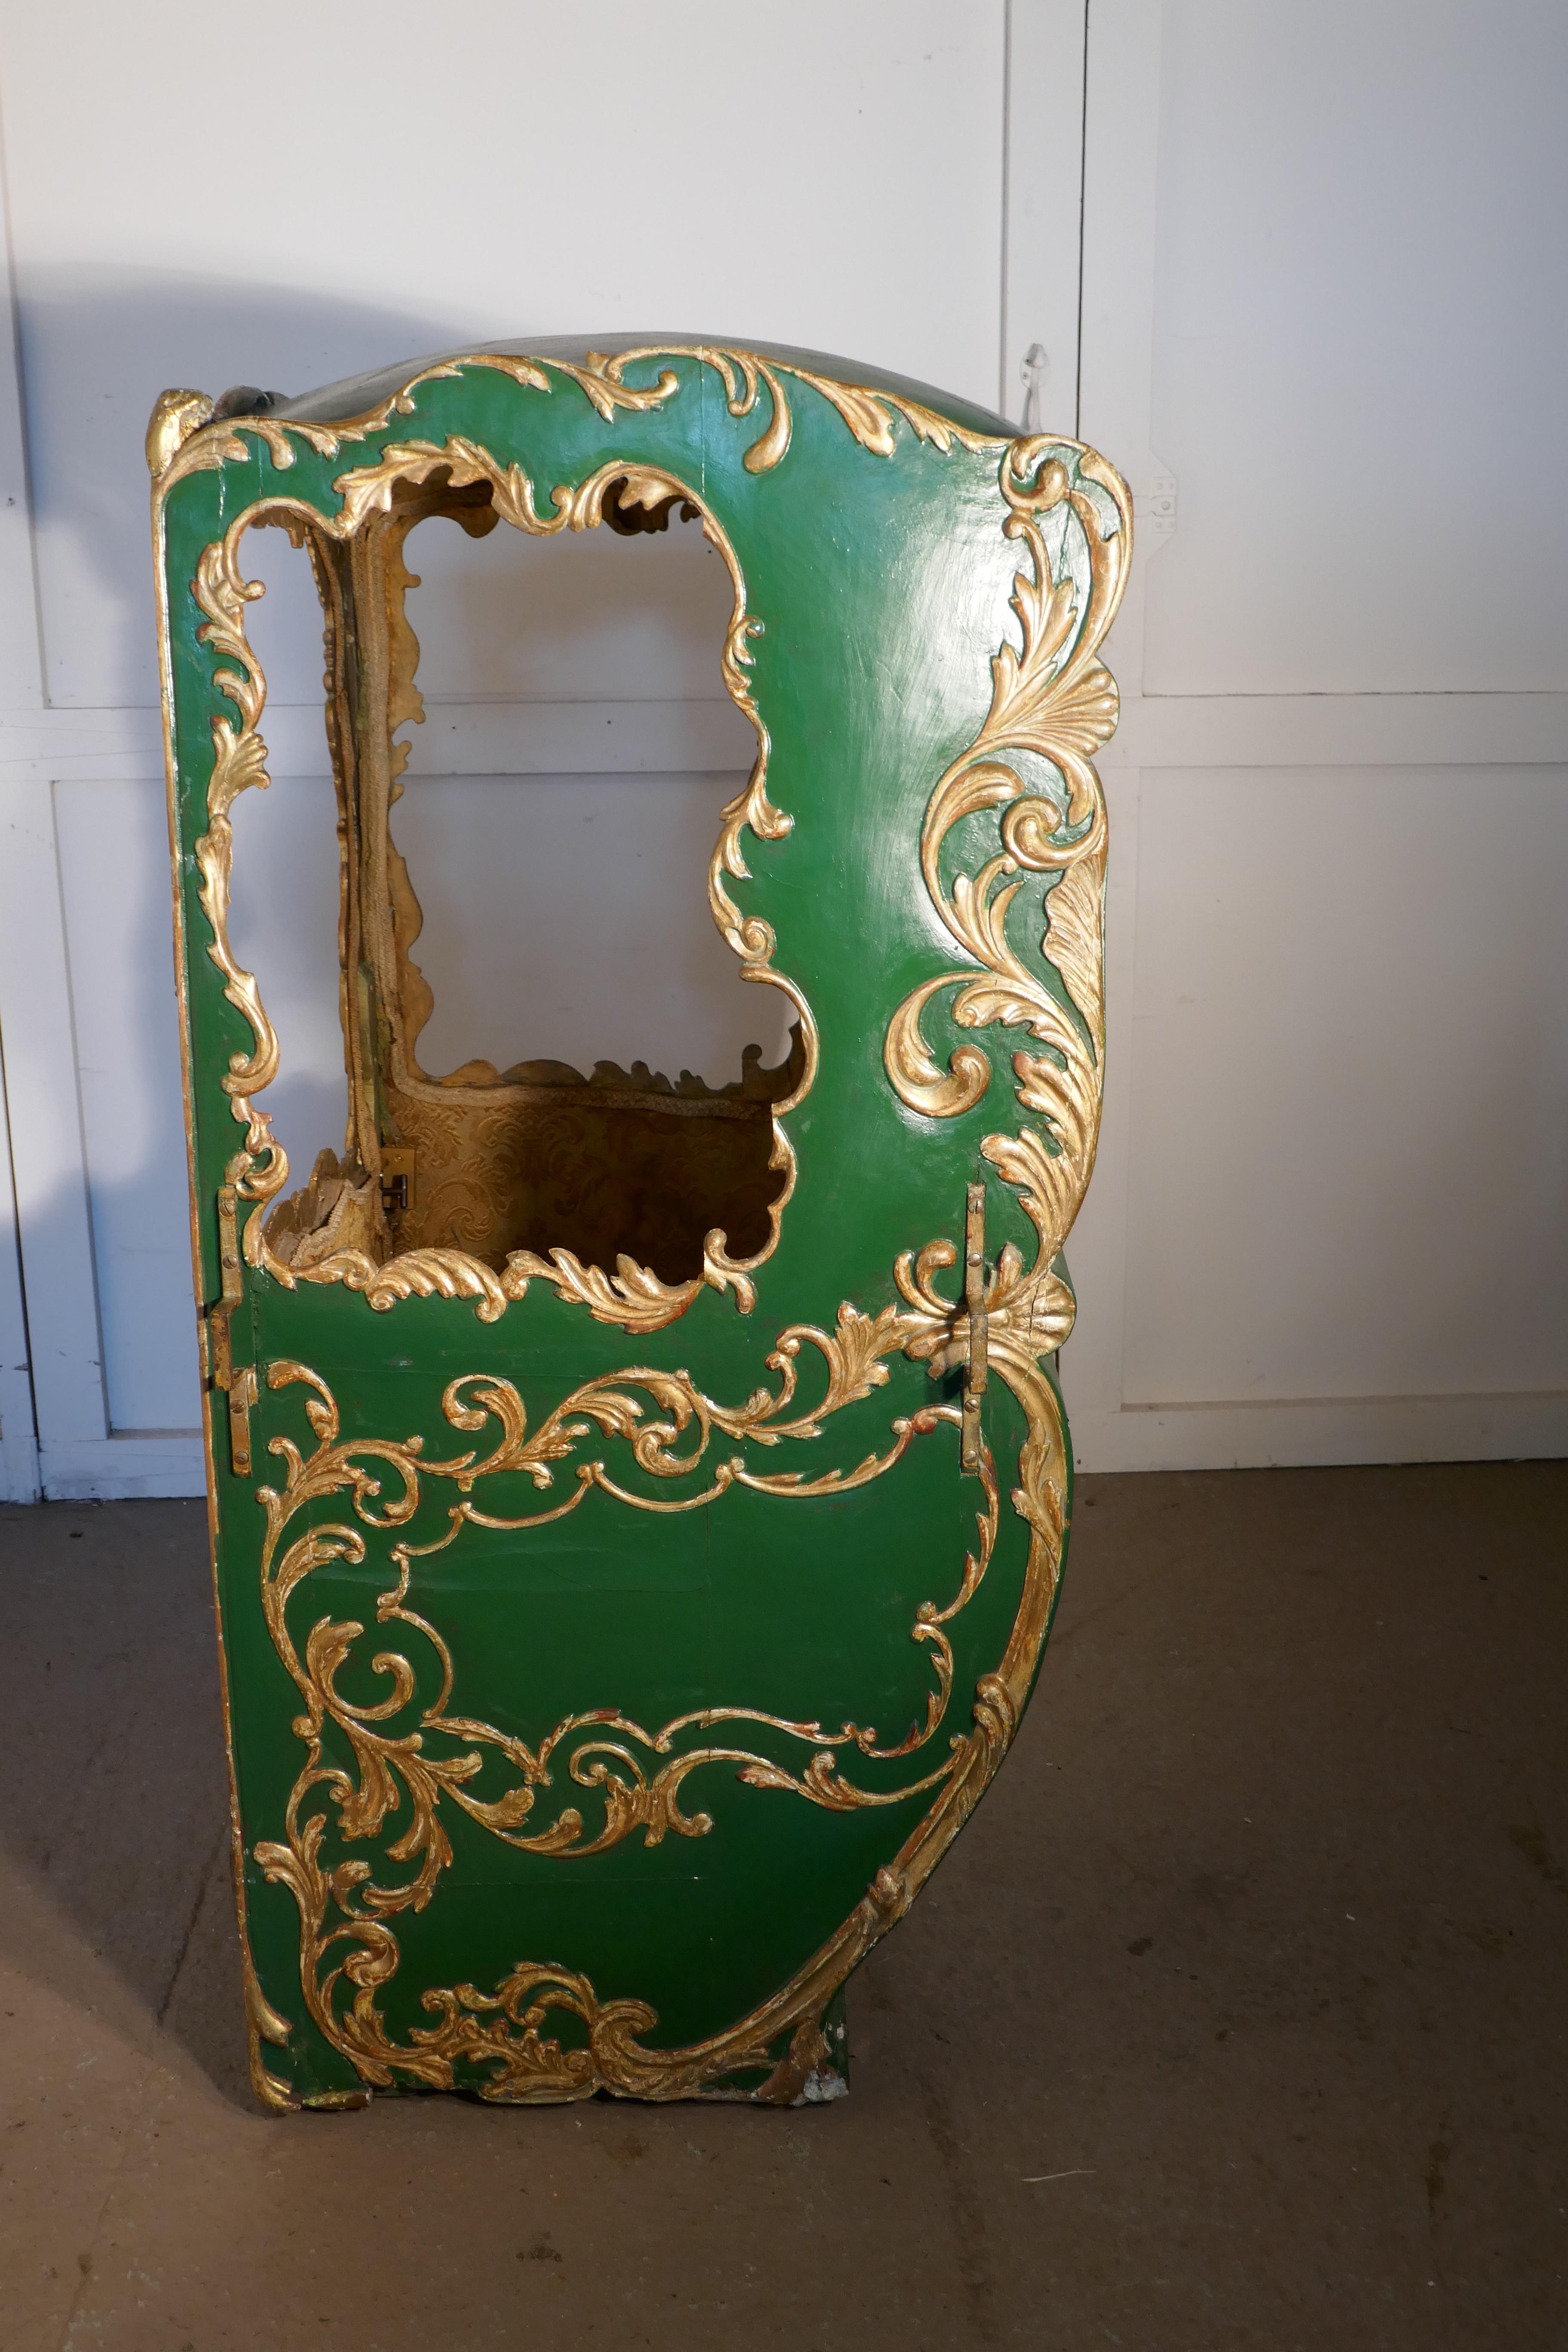 19th century Italian Sedan chair 

This is a mid-19th century piece, it is the Rococo style, in Green and Gold and upholstered inside in a heavy gold brocade, complete with cushion on the seat
The chair has an outward opening door and side